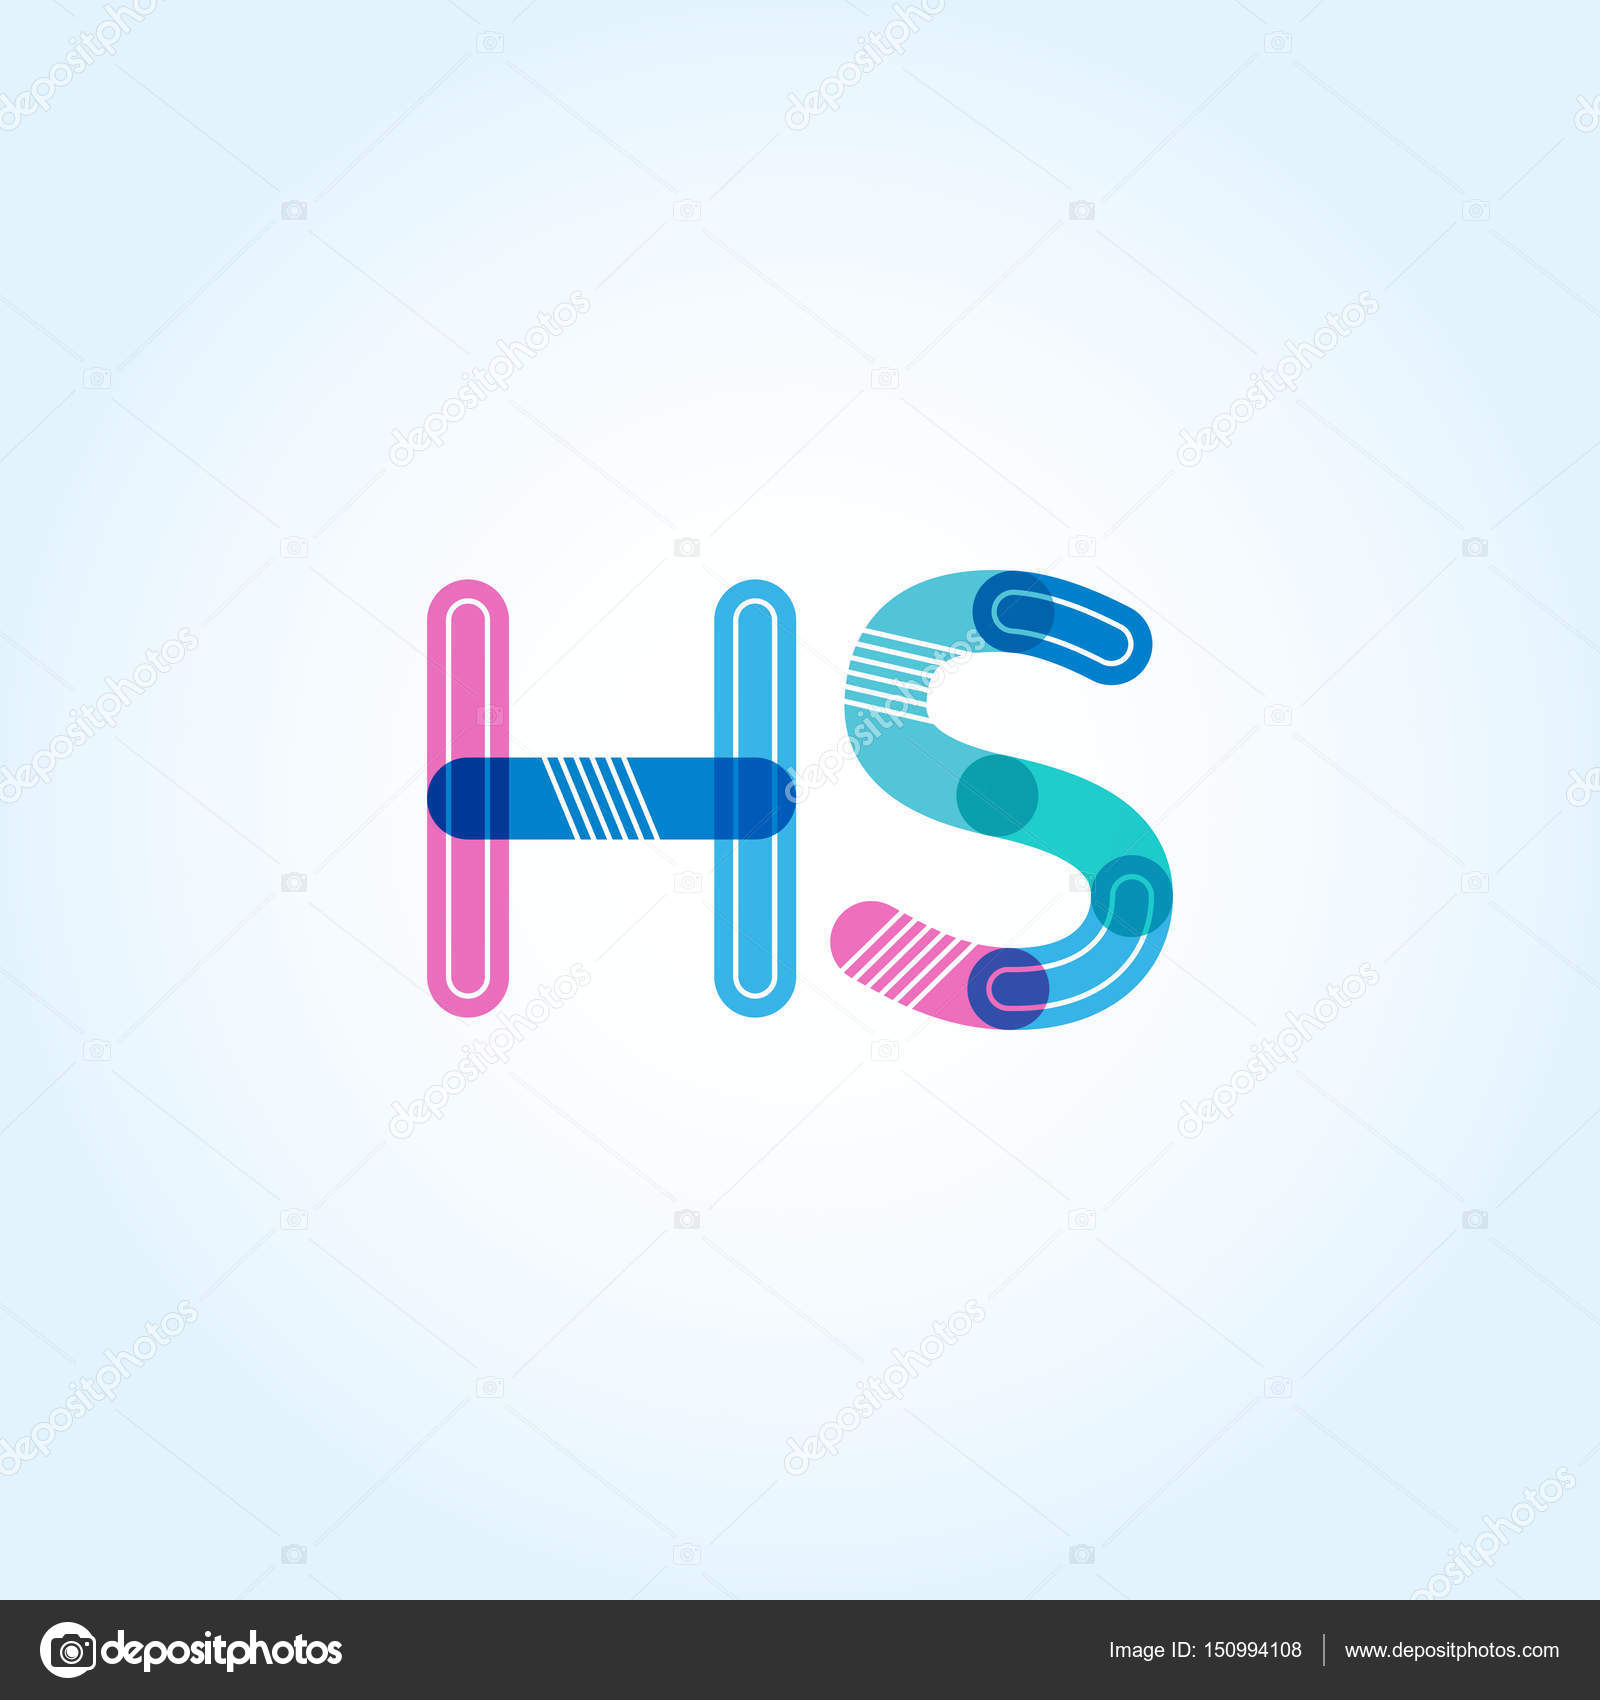 Hs Connected Letters Logo Vector Image By C Brainbistro Vector Stock